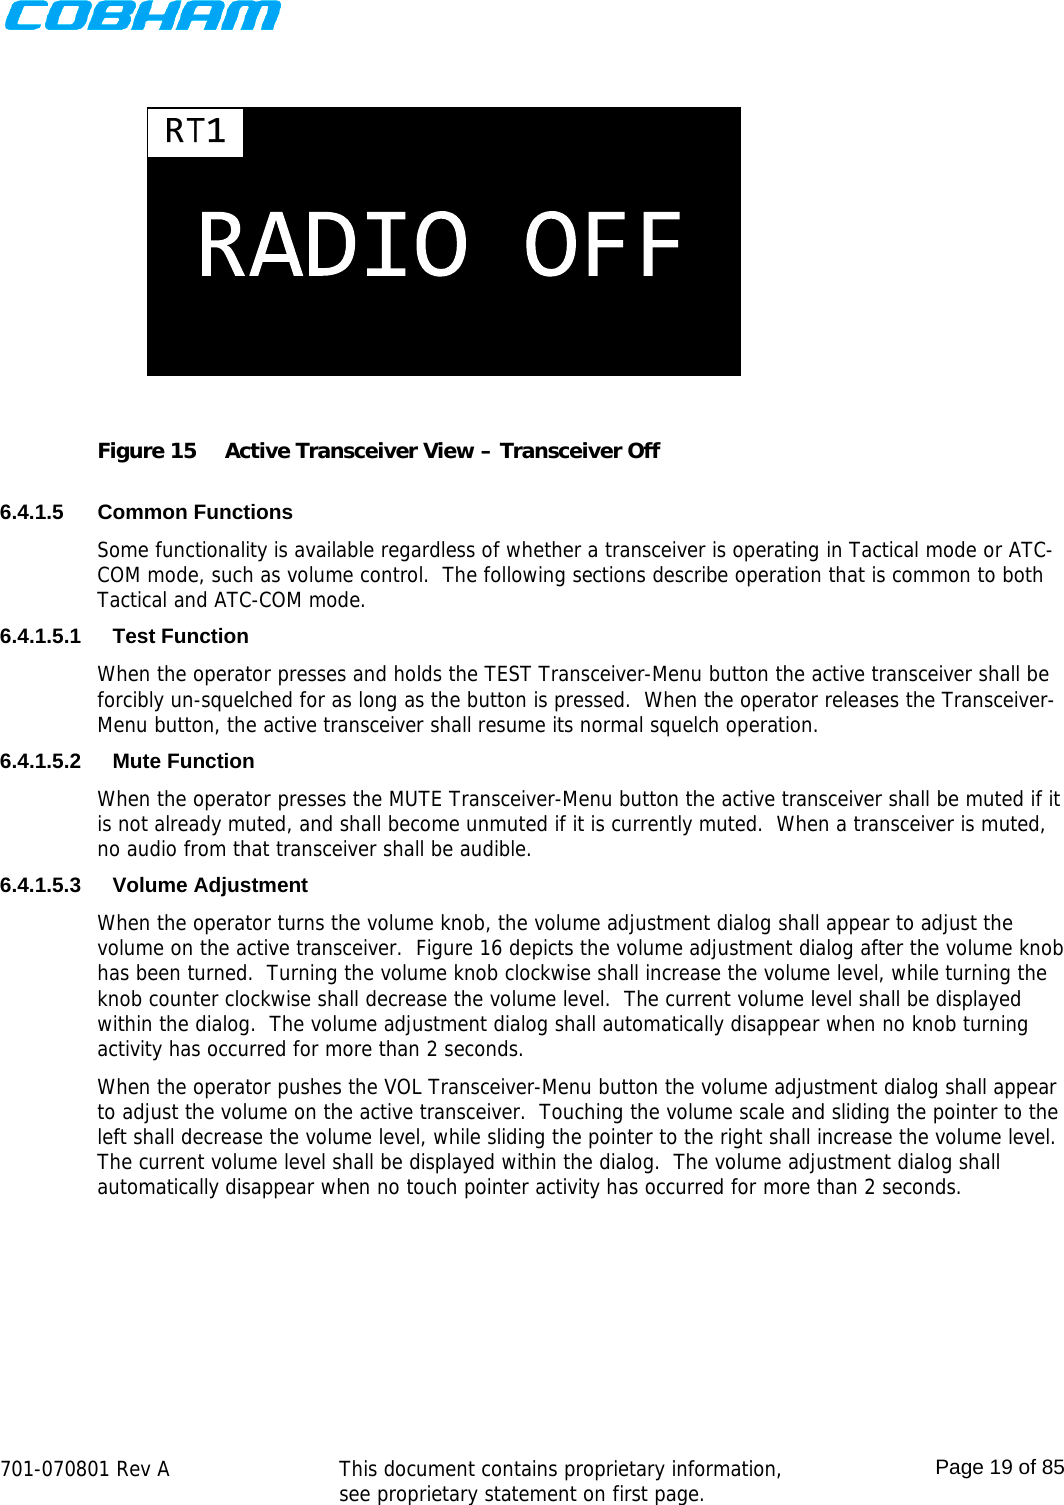    701-070801 Rev A   This document contains proprietary information, see proprietary statement on first page.  Page 19 of 85   Figure 15  Active Transceiver View – Transceiver Off  6.4.1.5 Common Functions Some functionality is available regardless of whether a transceiver is operating in Tactical mode or ATC-COM mode, such as volume control.  The following sections describe operation that is common to both Tactical and ATC-COM mode. 6.4.1.5.1 Test Function When the operator presses and holds the TEST Transceiver-Menu button the active transceiver shall be forcibly un-squelched for as long as the button is pressed.  When the operator releases the Transceiver-Menu button, the active transceiver shall resume its normal squelch operation. 6.4.1.5.2 Mute Function When the operator presses the MUTE Transceiver-Menu button the active transceiver shall be muted if it is not already muted, and shall become unmuted if it is currently muted.  When a transceiver is muted, no audio from that transceiver shall be audible. 6.4.1.5.3 Volume Adjustment When the operator turns the volume knob, the volume adjustment dialog shall appear to adjust the volume on the active transceiver.  Figure 16 depicts the volume adjustment dialog after the volume knob has been turned.  Turning the volume knob clockwise shall increase the volume level, while turning the knob counter clockwise shall decrease the volume level.  The current volume level shall be displayed within the dialog.  The volume adjustment dialog shall automatically disappear when no knob turning activity has occurred for more than 2 seconds. When the operator pushes the VOL Transceiver-Menu button the volume adjustment dialog shall appear to adjust the volume on the active transceiver.  Touching the volume scale and sliding the pointer to the left shall decrease the volume level, while sliding the pointer to the right shall increase the volume level.  The current volume level shall be displayed within the dialog.  The volume adjustment dialog shall automatically disappear when no touch pointer activity has occurred for more than 2 seconds. 